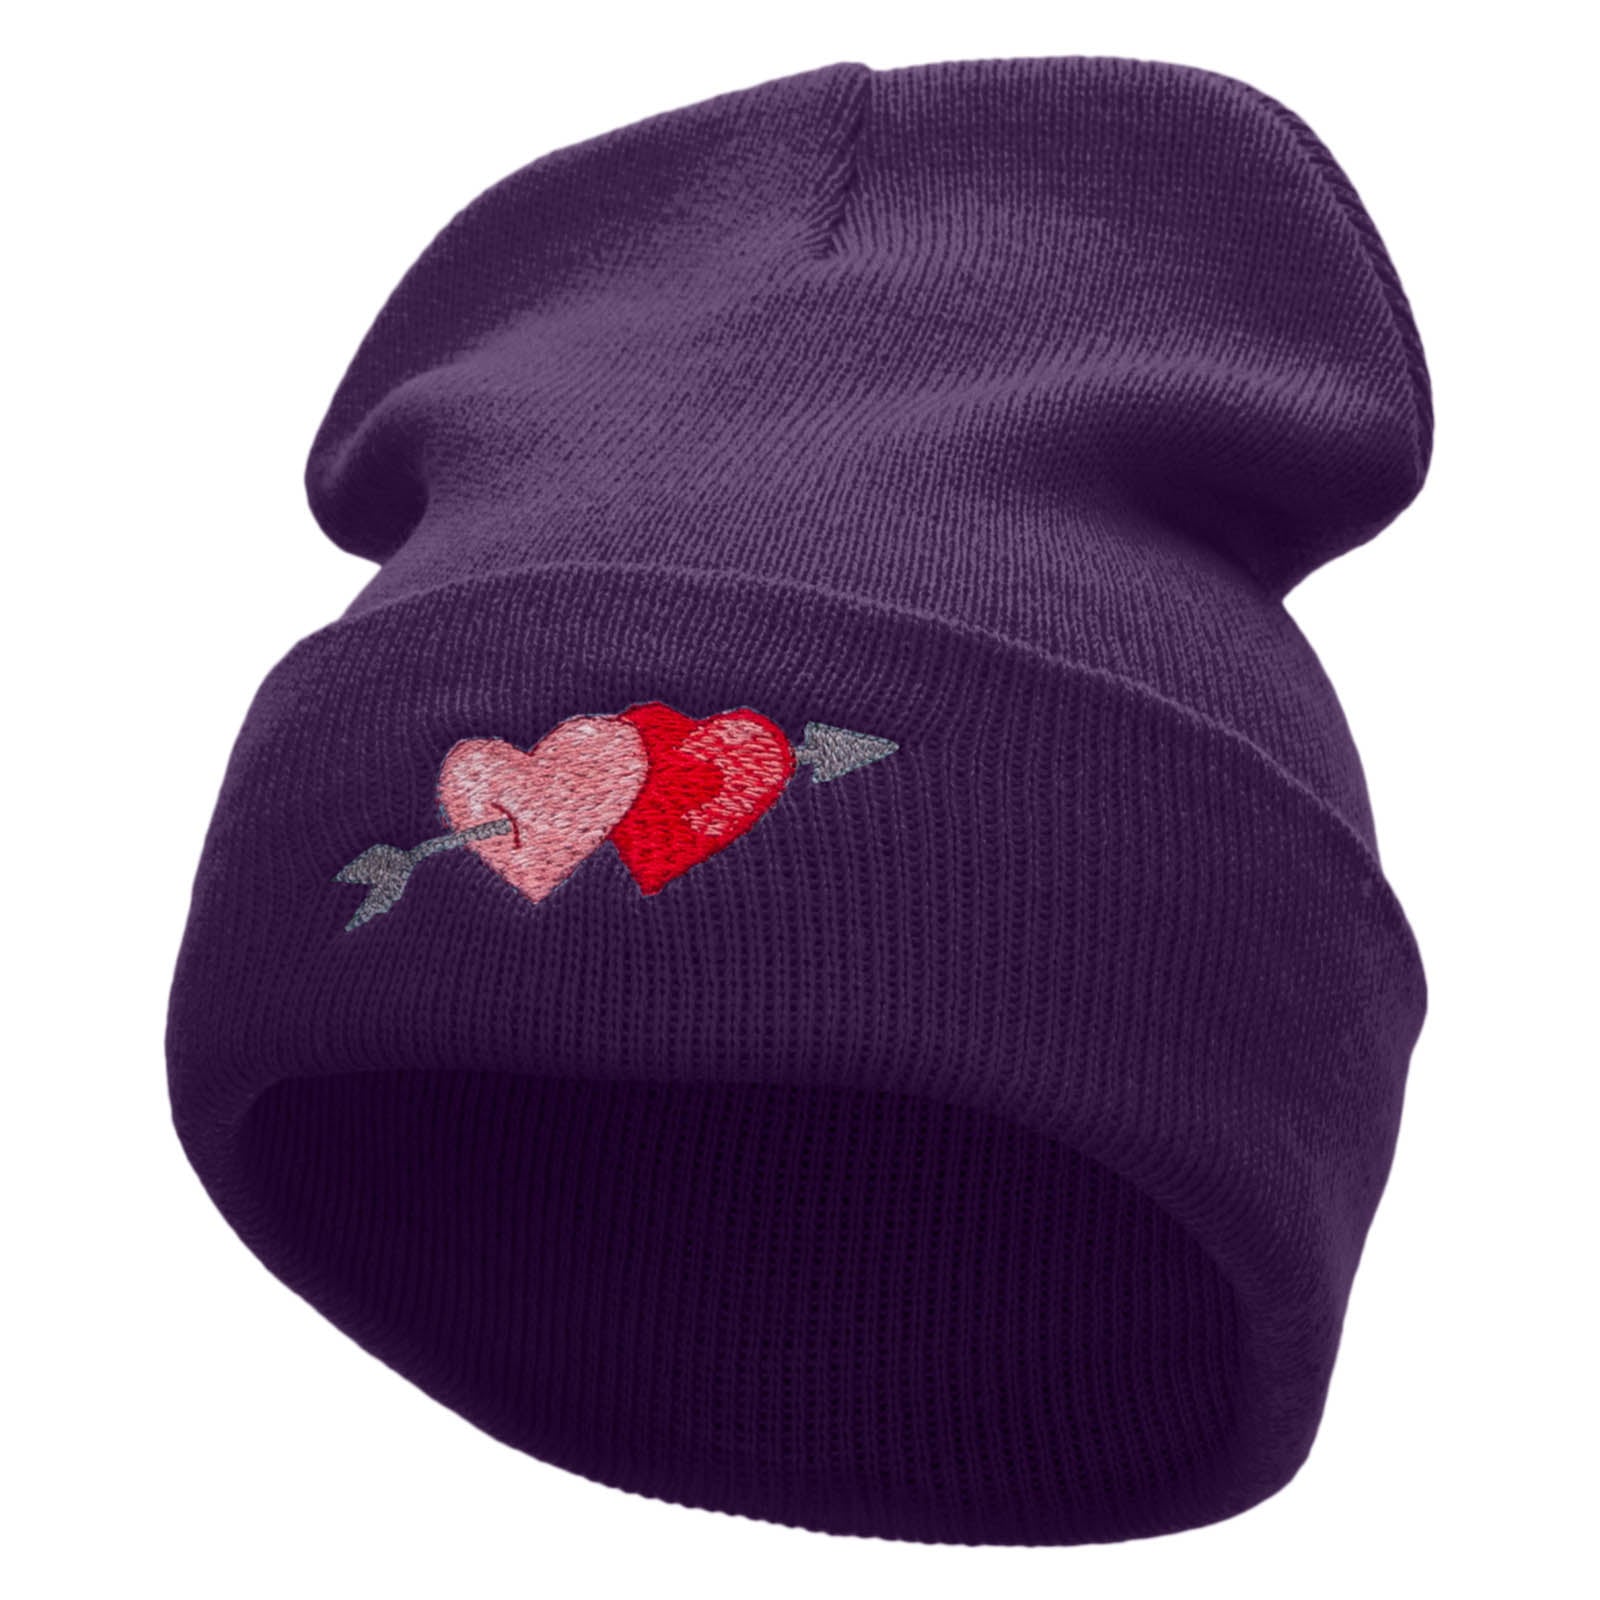 Arrow and Heart Embroidered 12 Inch Solid Long Beanie Made in USA - Purple OSFM